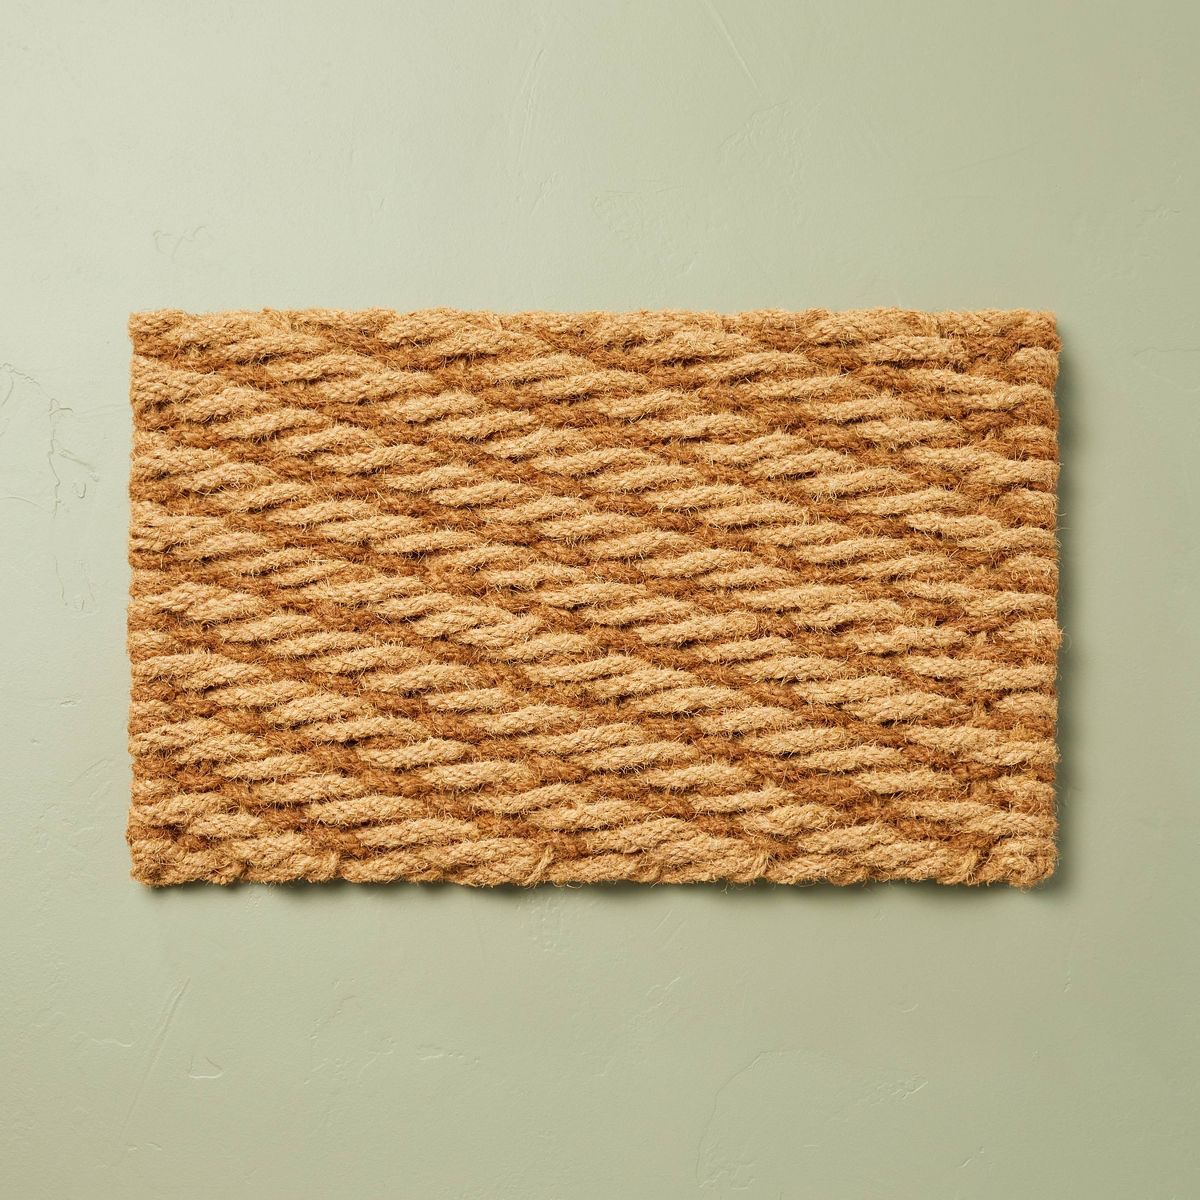 Chunky Twisted Rope Handwoven Coir Doormat Natural/Brown - Hearth & Hand™ with Magnolia | Target